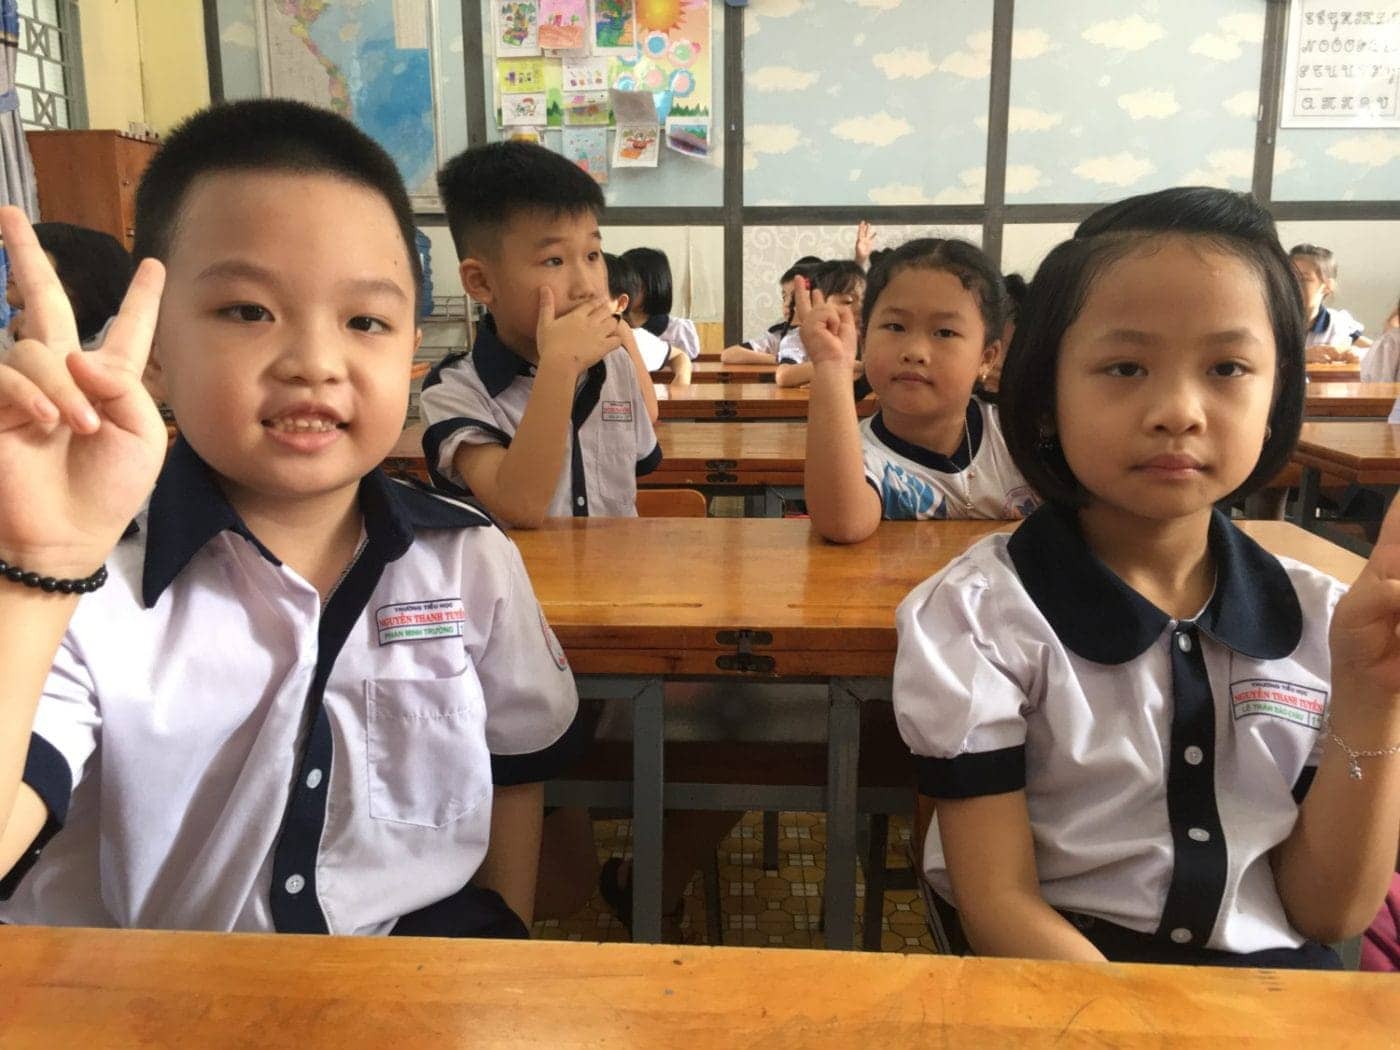 First-grade-English-class-at-Nguyen-Thanh-Nguyen-Primary-School-in-Tan-Binh-District-Ho-Chi-Minh-City-on-1st-day-back-to-school-from-lockdown-051120-by-teacher-photographer-©Le-Thi-Xuan-Ninh-1400x1050, Viet Nam vs. COVID-19: How one small nation defeated a global enemy, World News & Views 